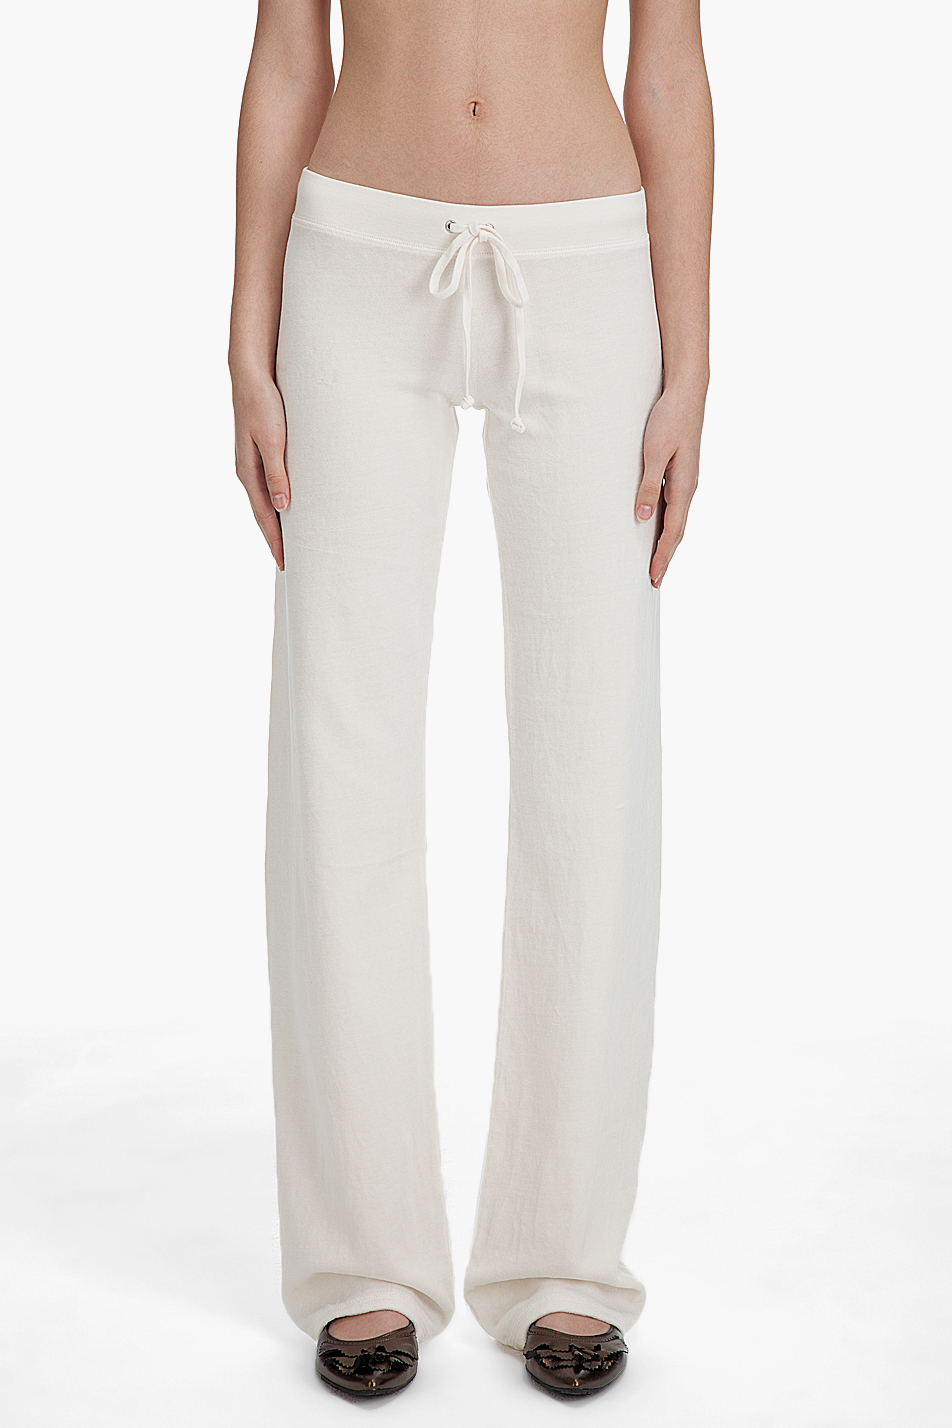 Juicy Couture Original Velour Pants in White | Lyst